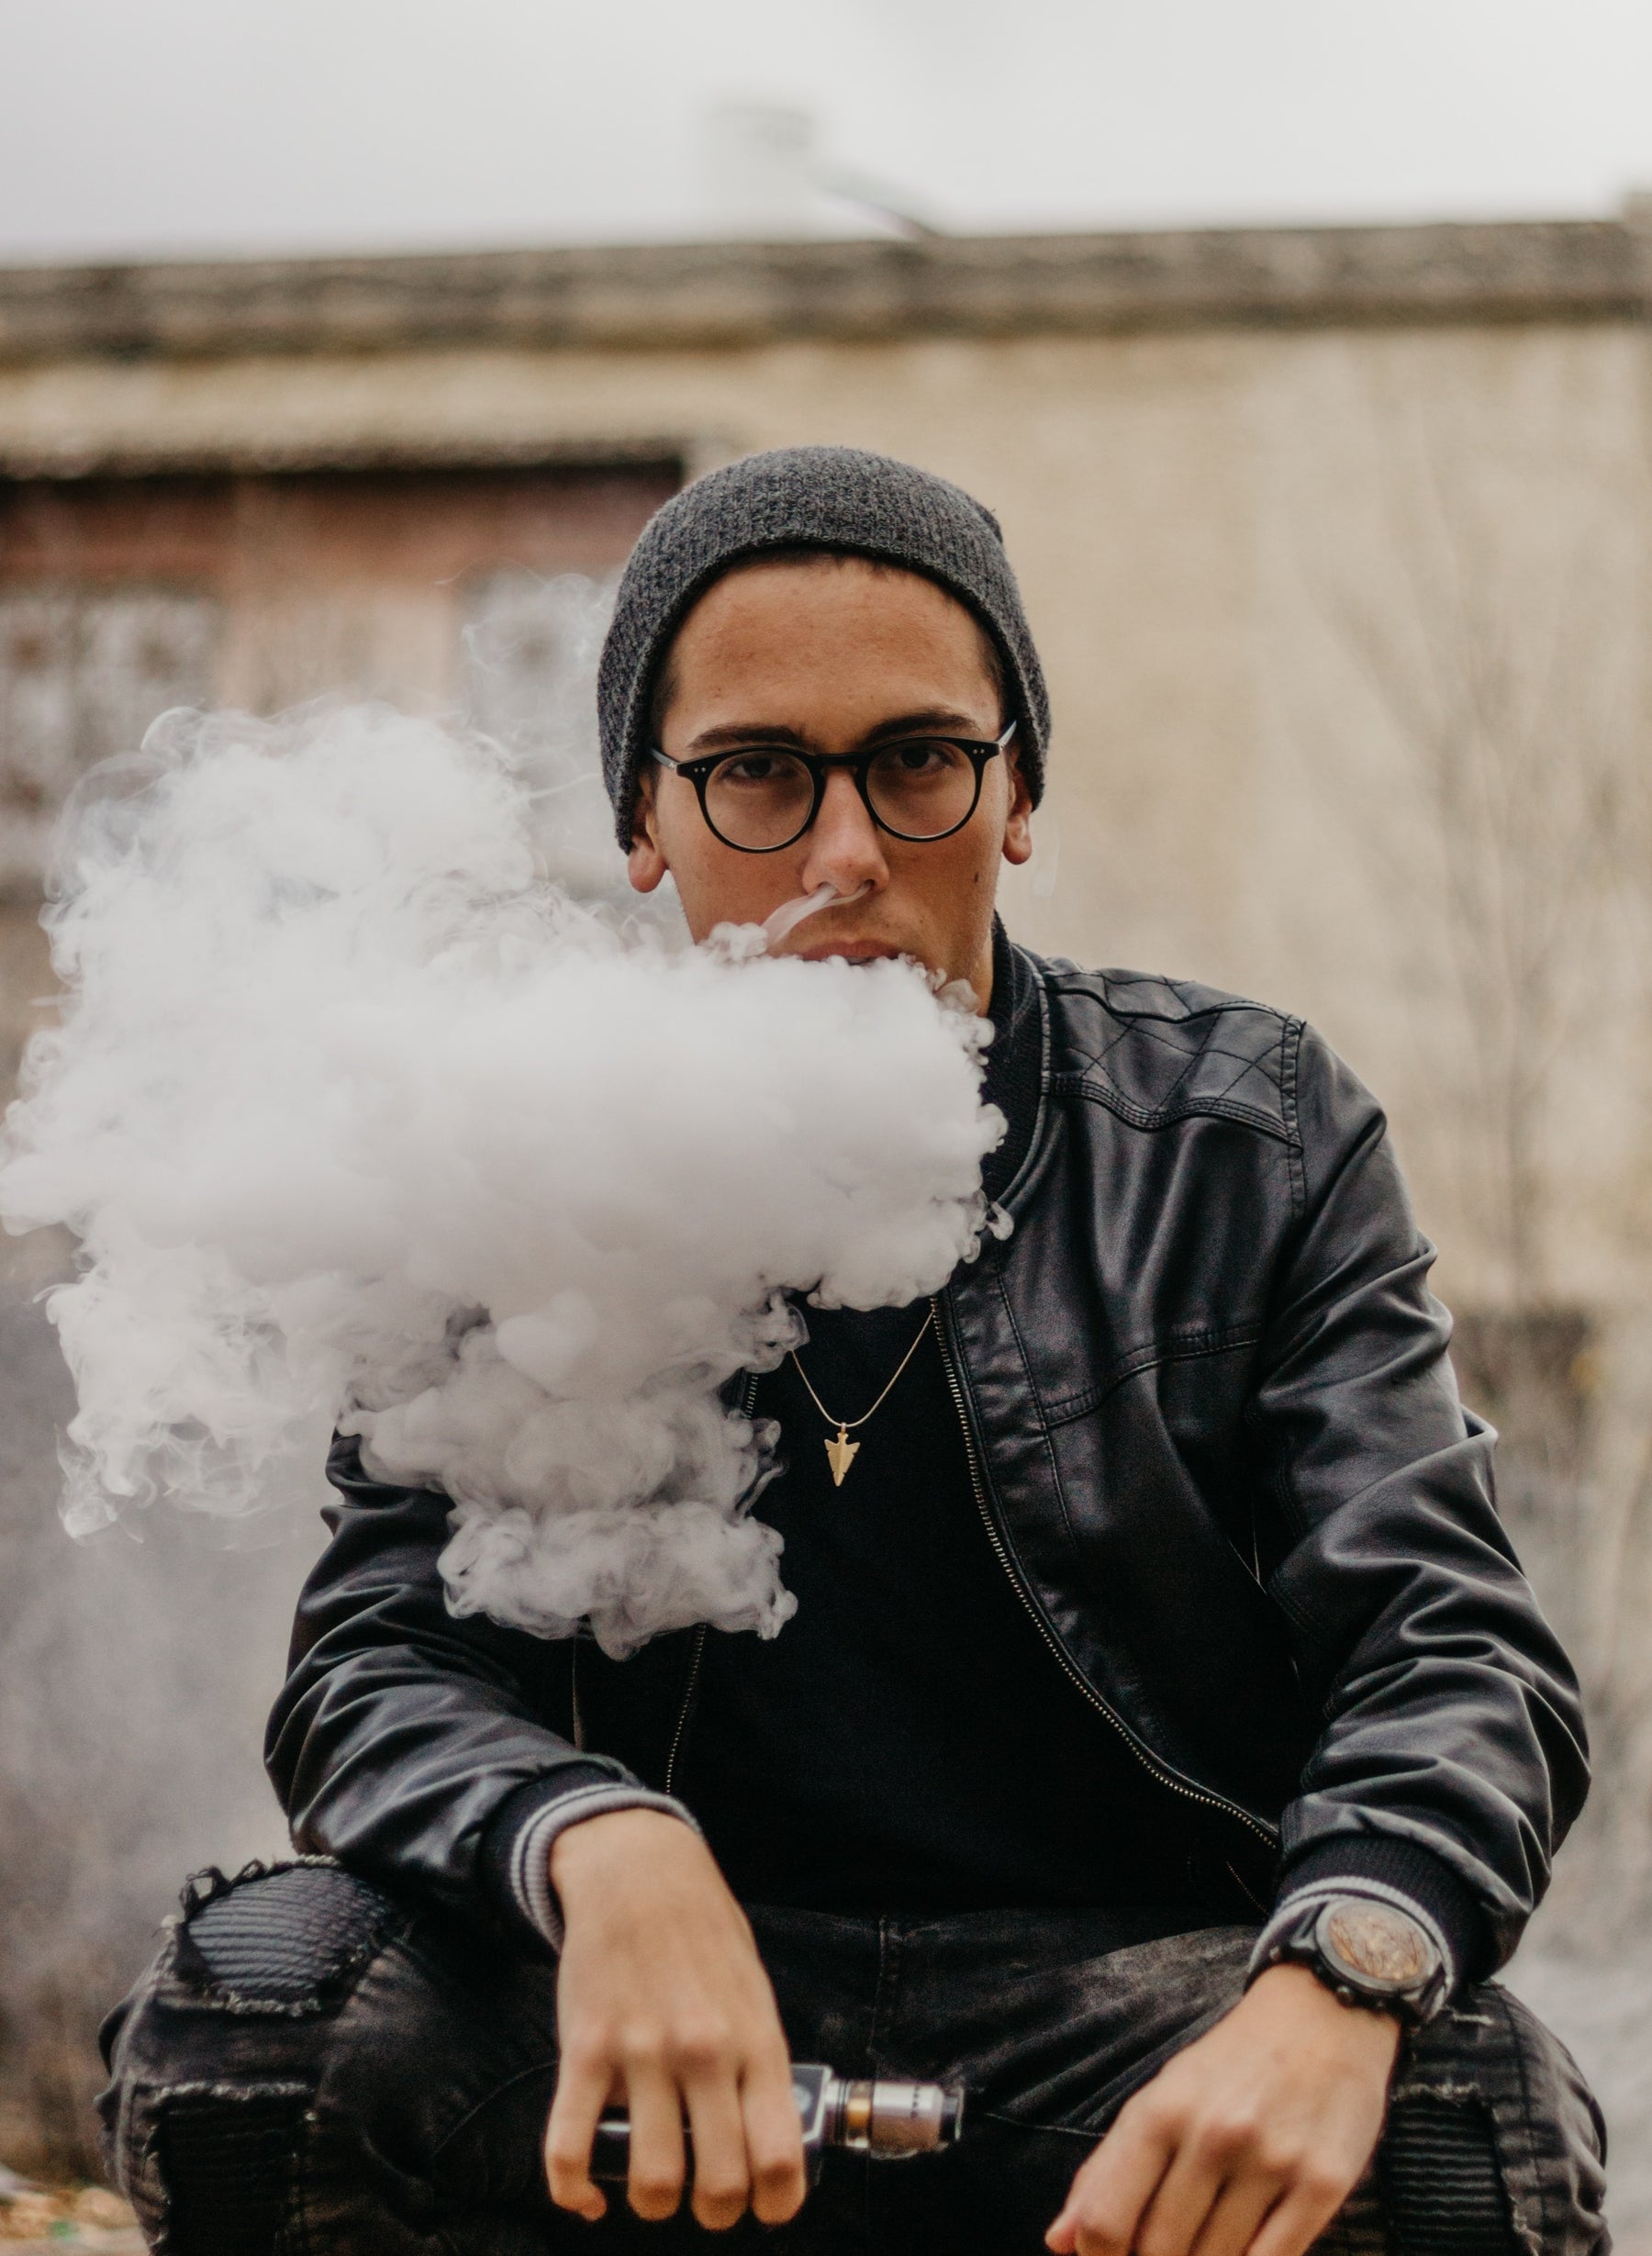 Our Guide on How to Vape - What to Know